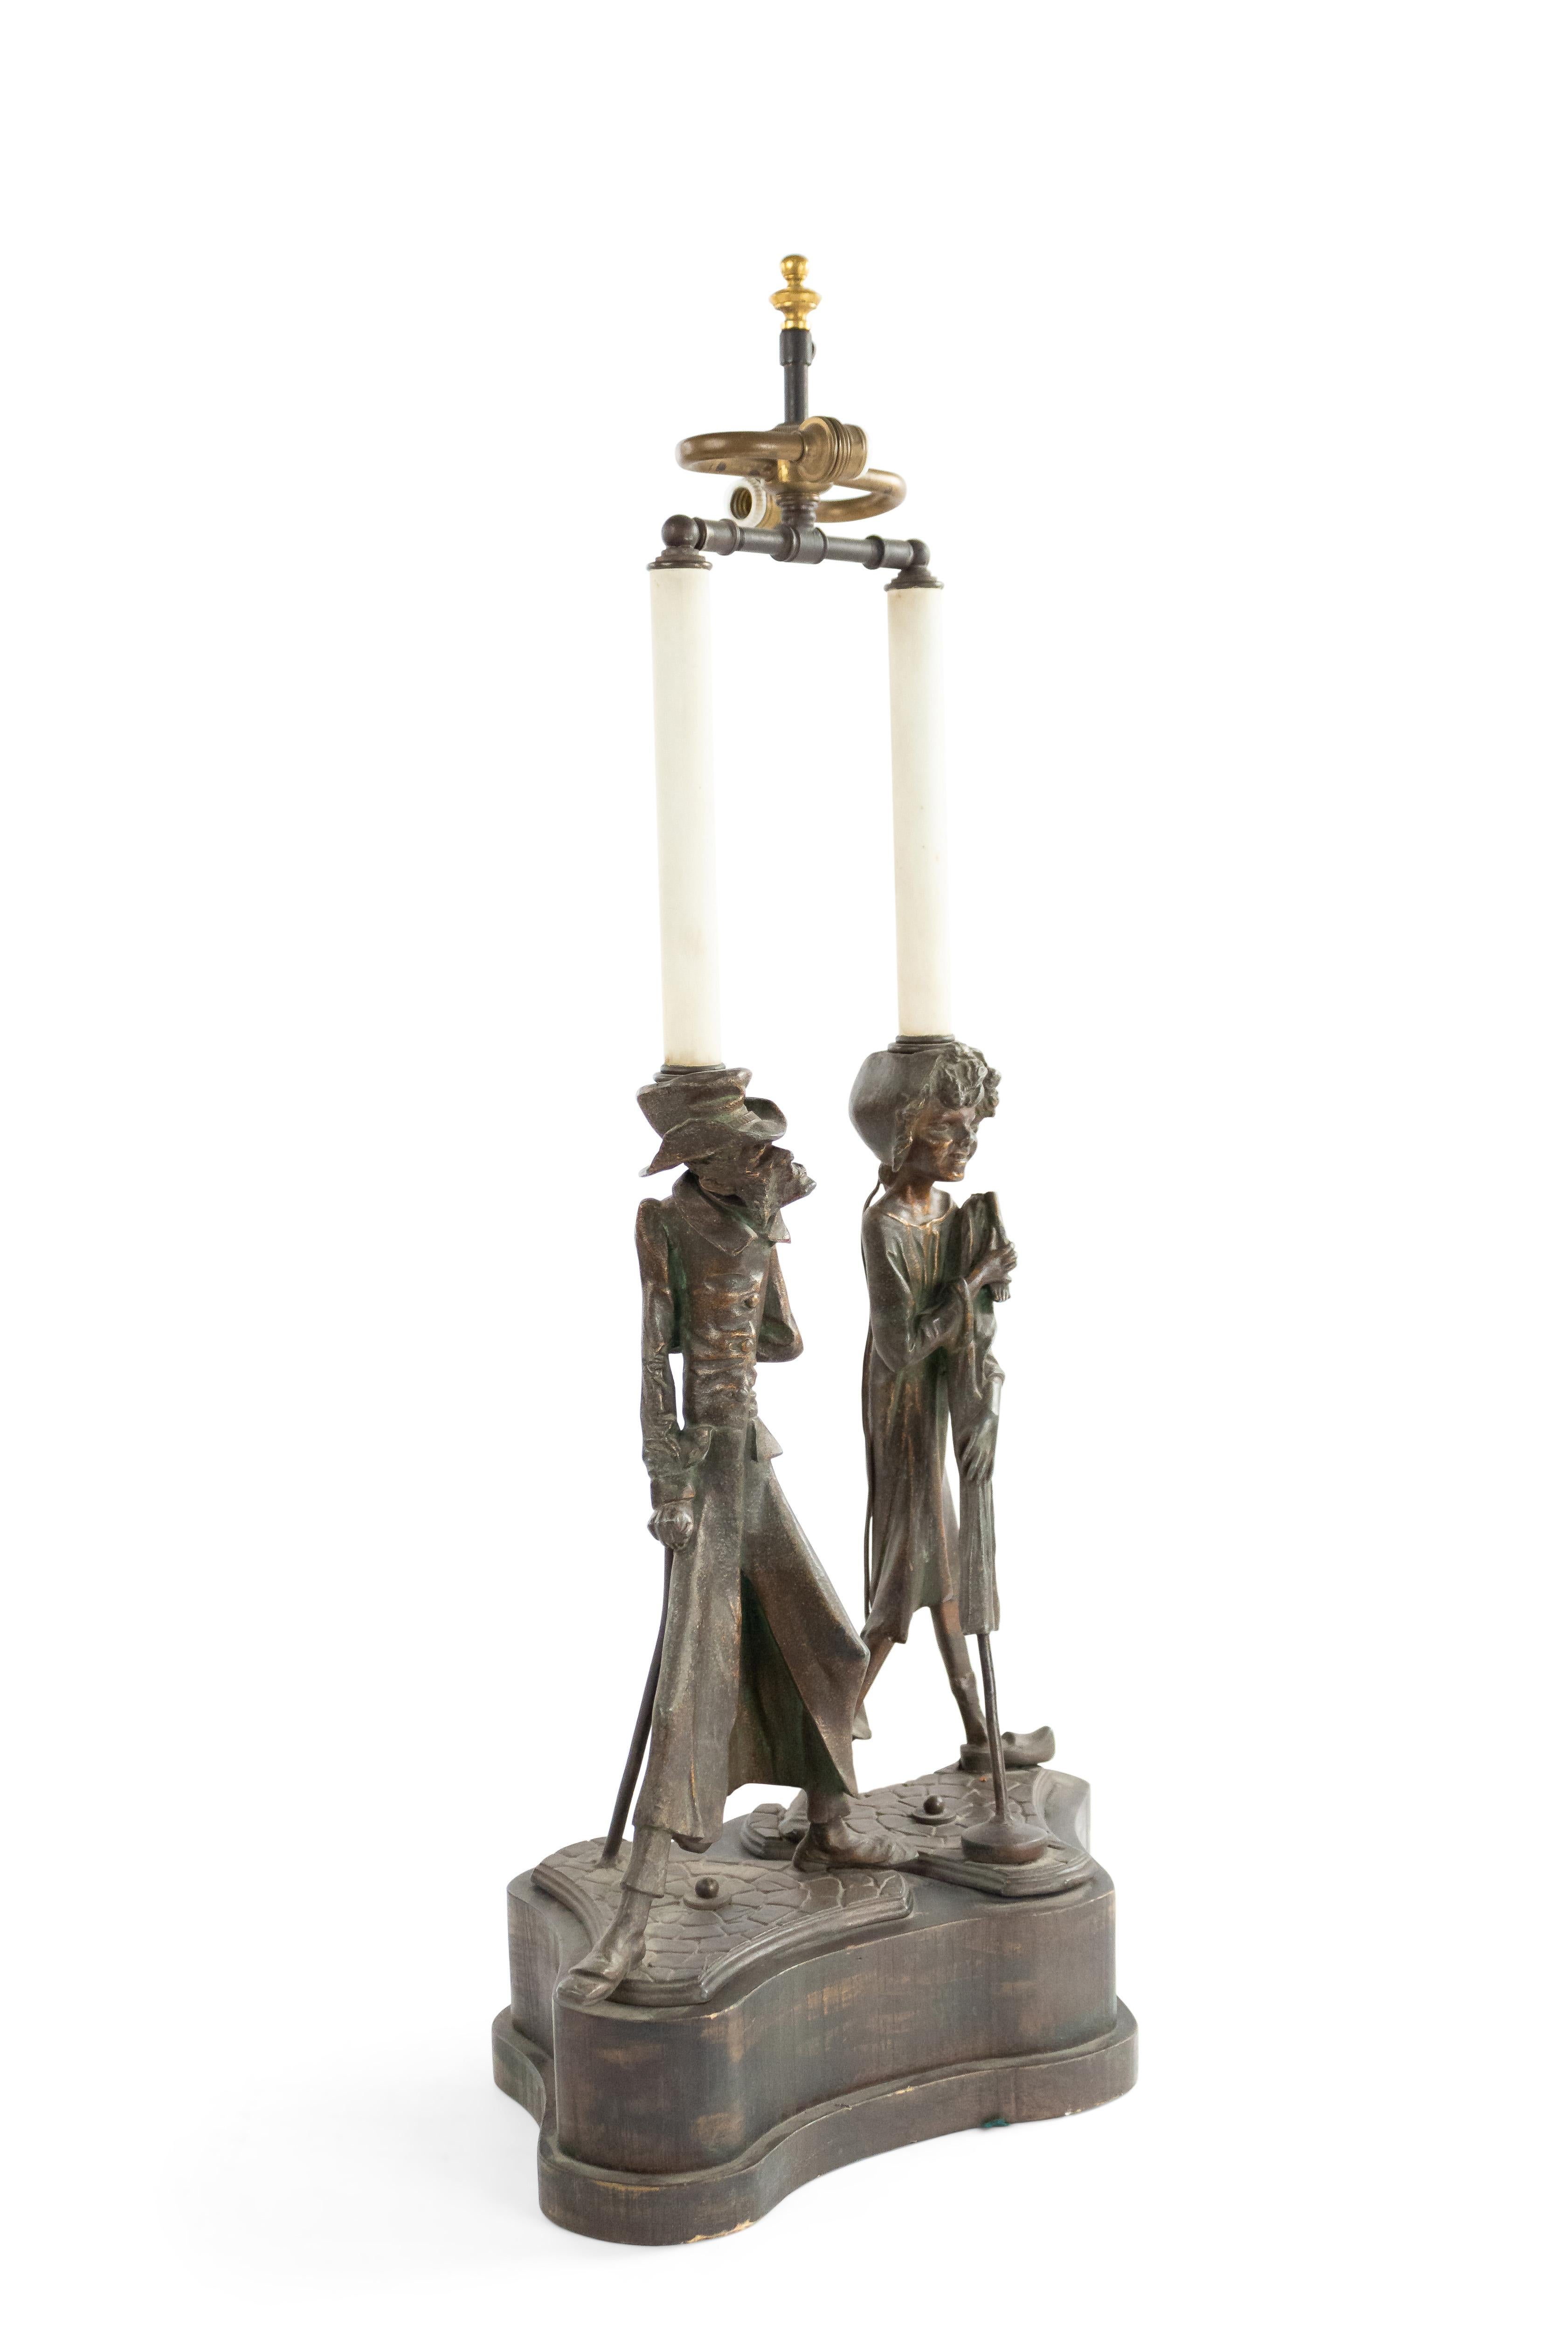 English Victorian metal table lamp with character man and woman standing on shaped wood base.
